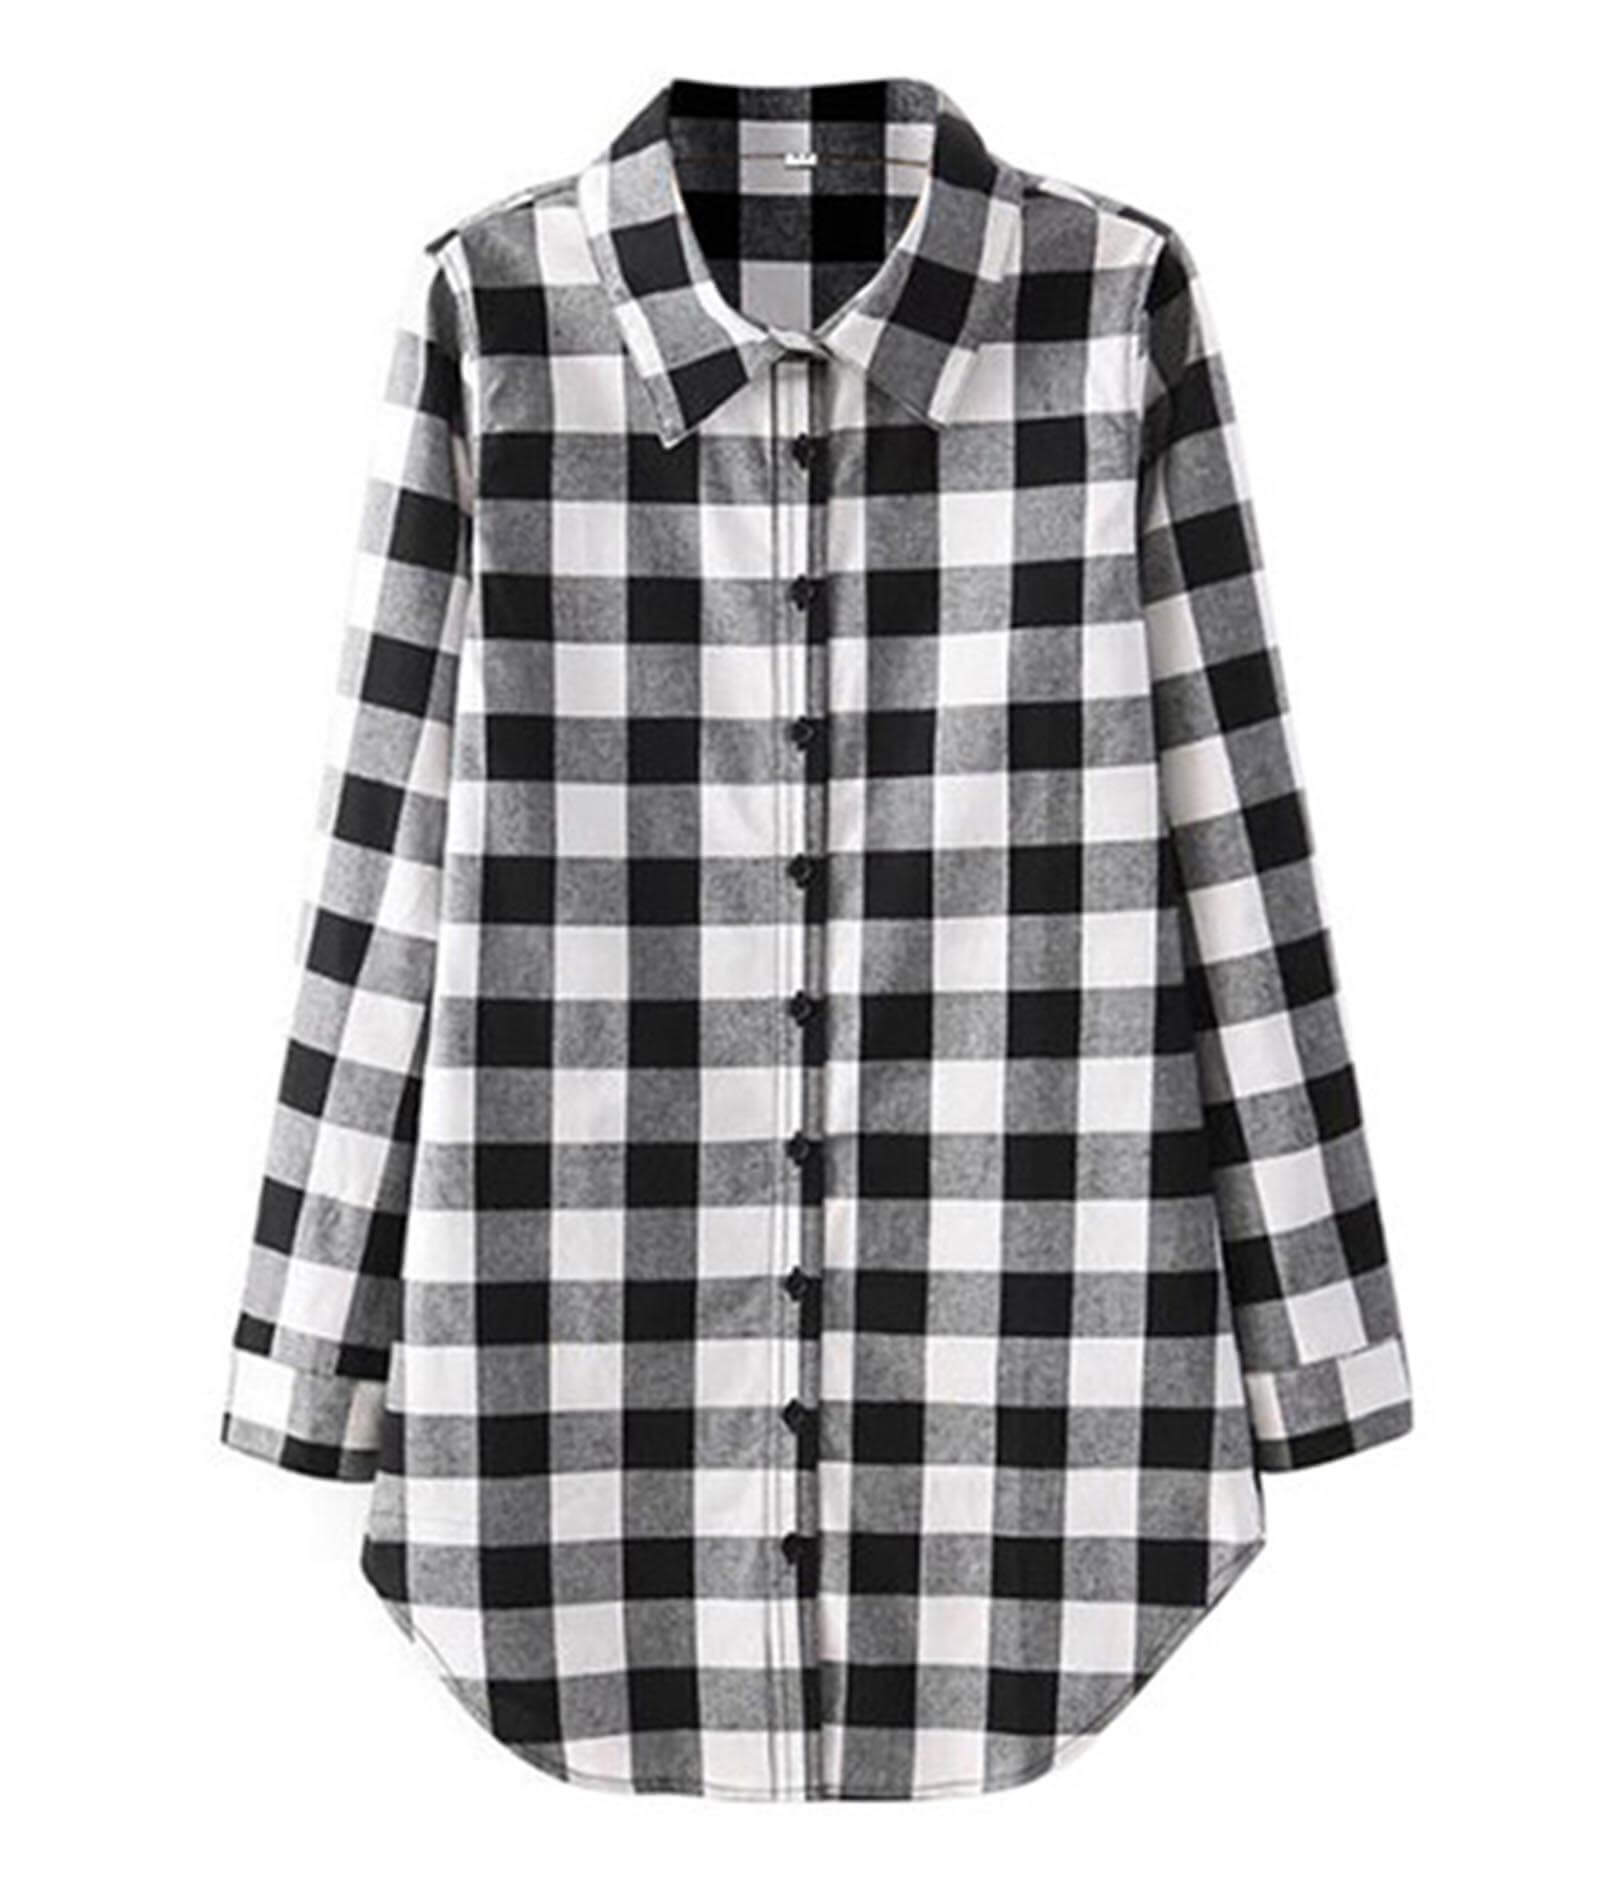  Women's Button Down Buffalo Check Plaid Classic Fit Long Sleeve Lightweight V Neck Pattern Blouse Shirts Tops